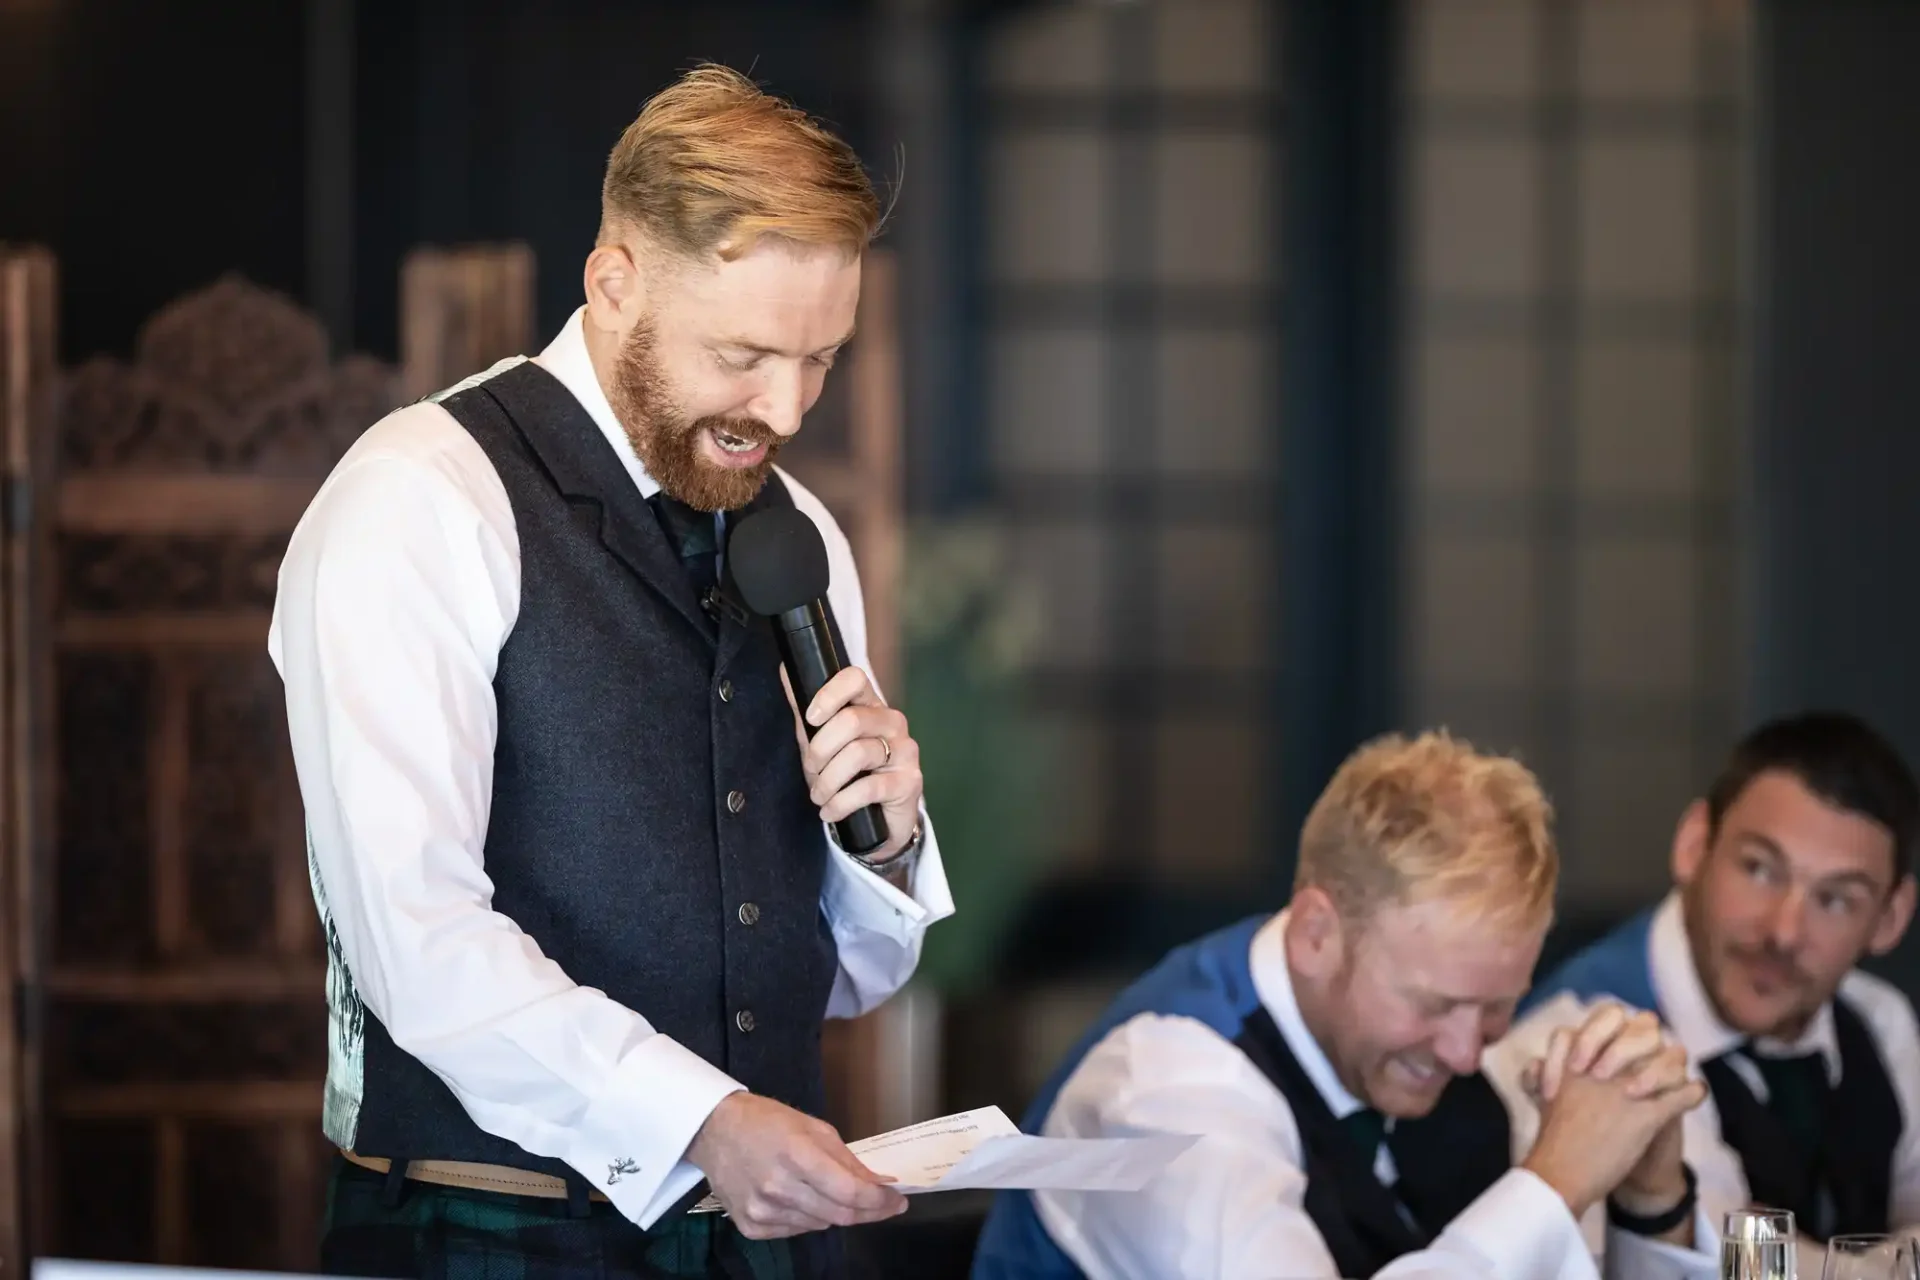 A man with a beard, wearing a vest and kilt, gives a speech holding a microphone and a paper, with another man laughing in the background.